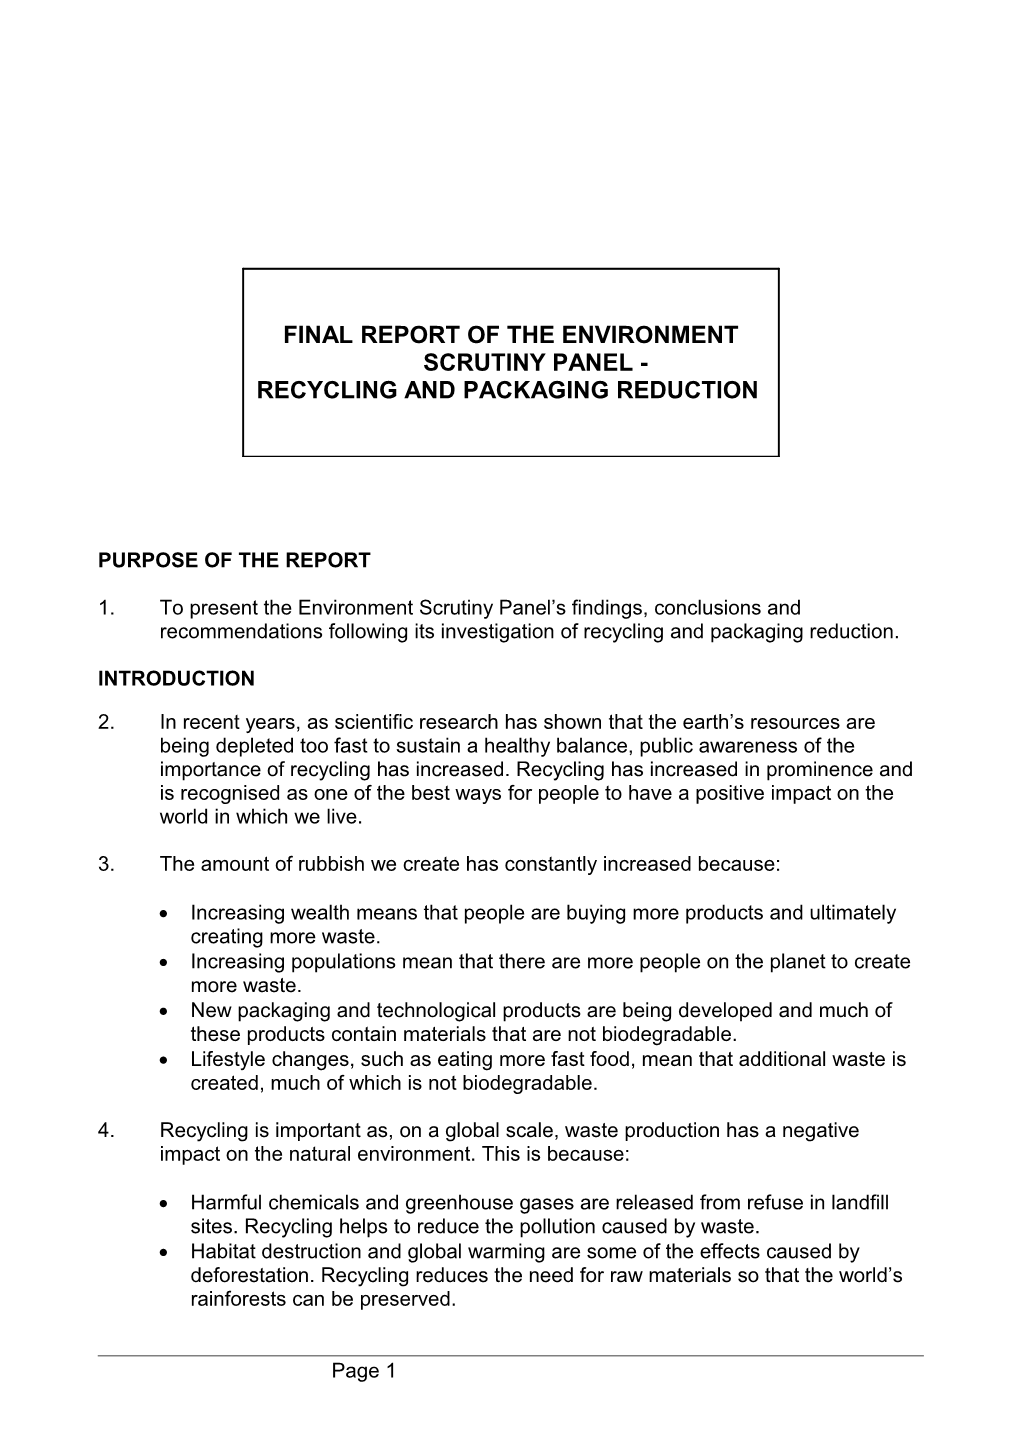 Final Report of the Environment Scrutiny Panel